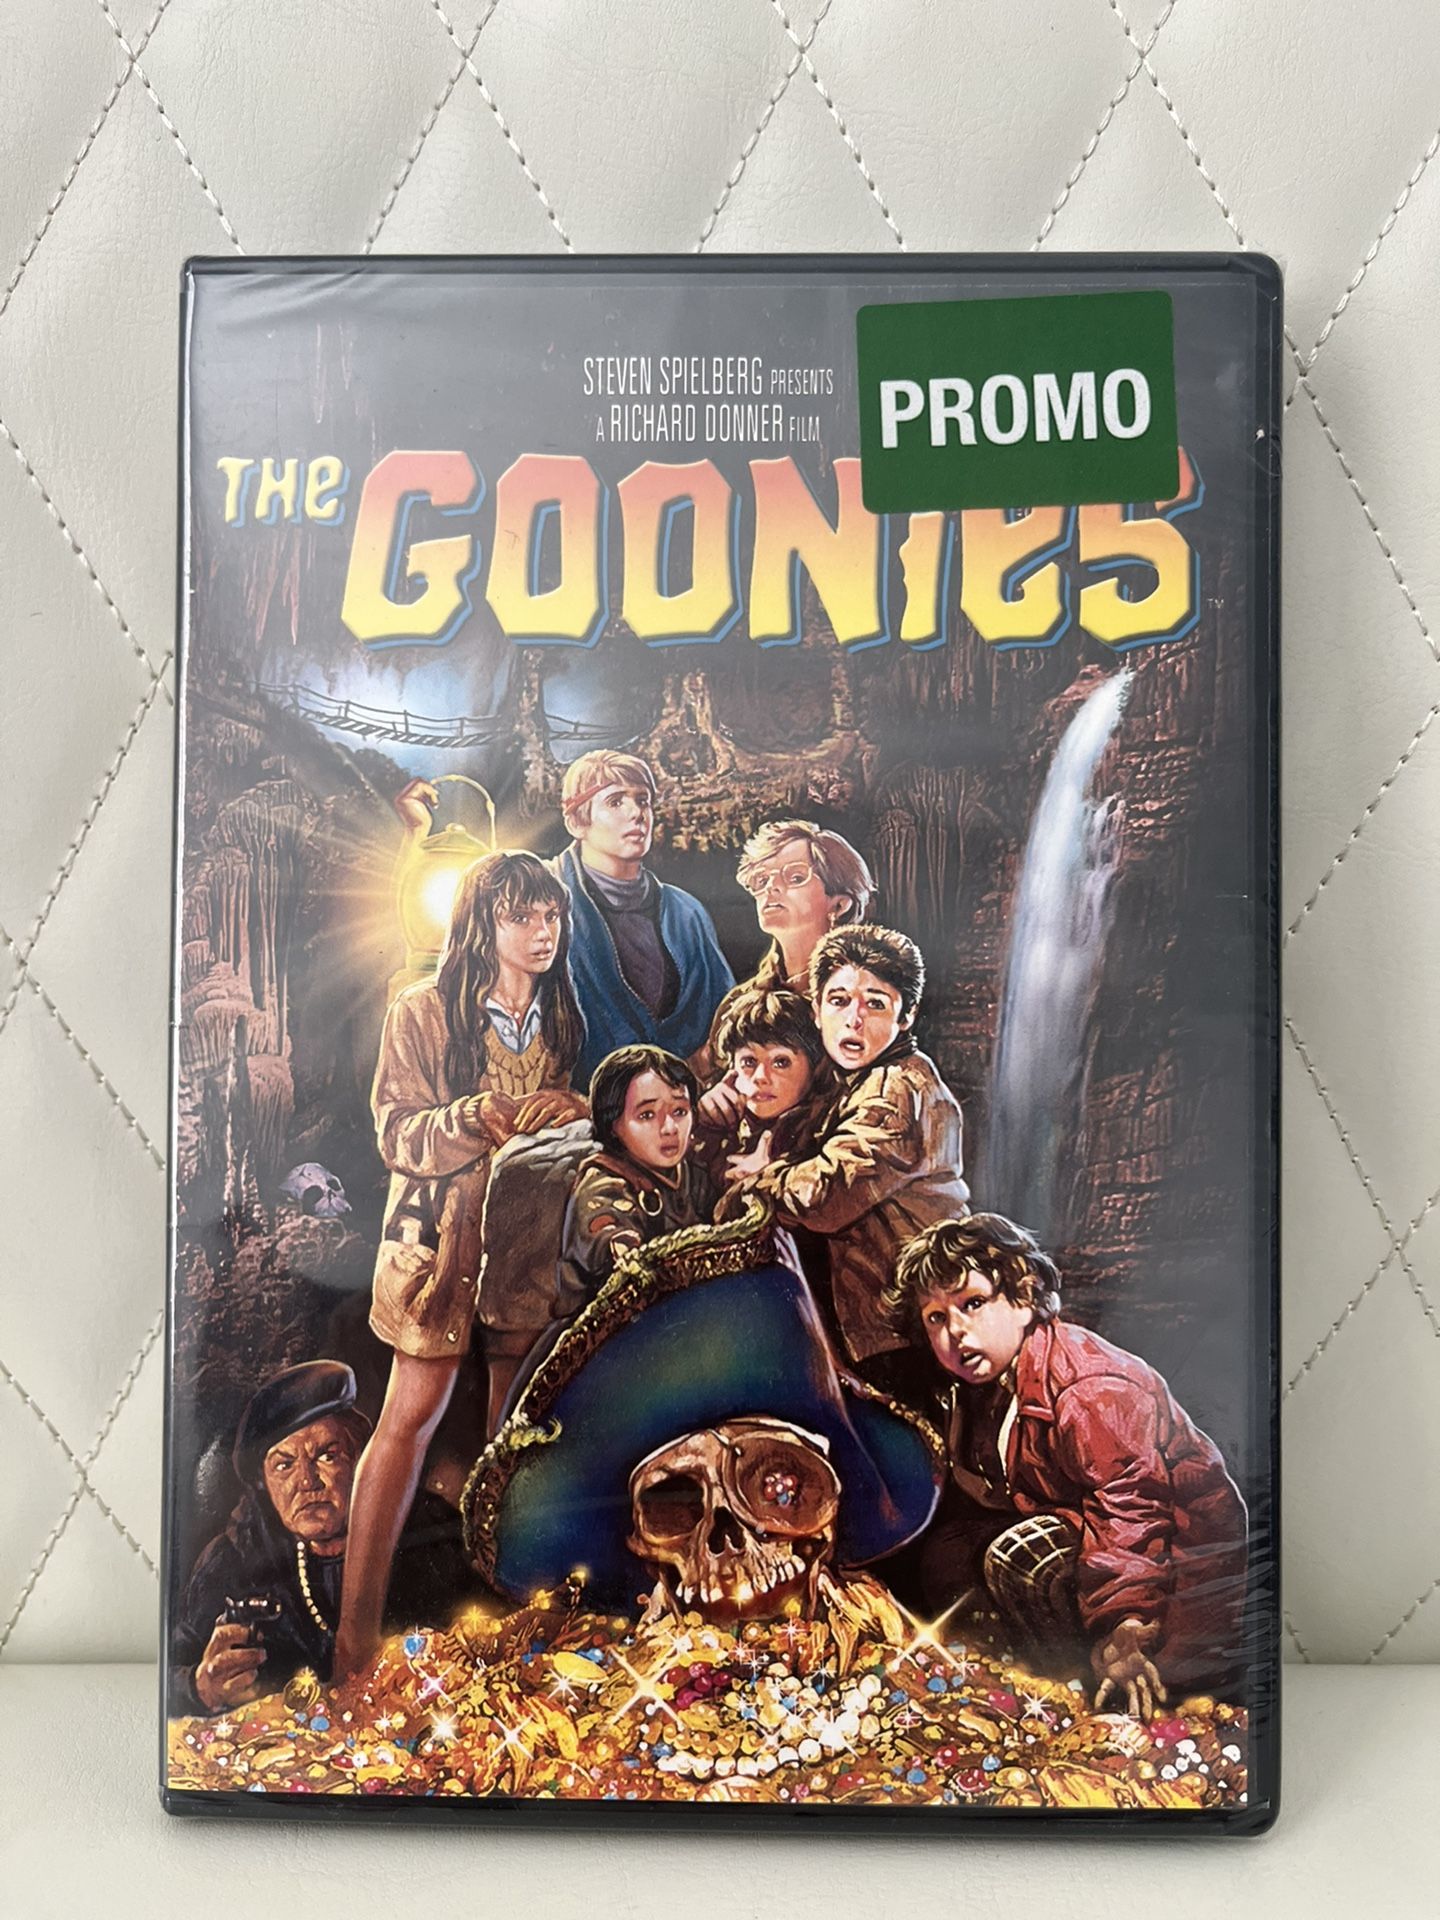 The Goonies-DVD-2010-Spielberg/Donner-Warner Bros.-Family/Cult-Promo-New/Sealed